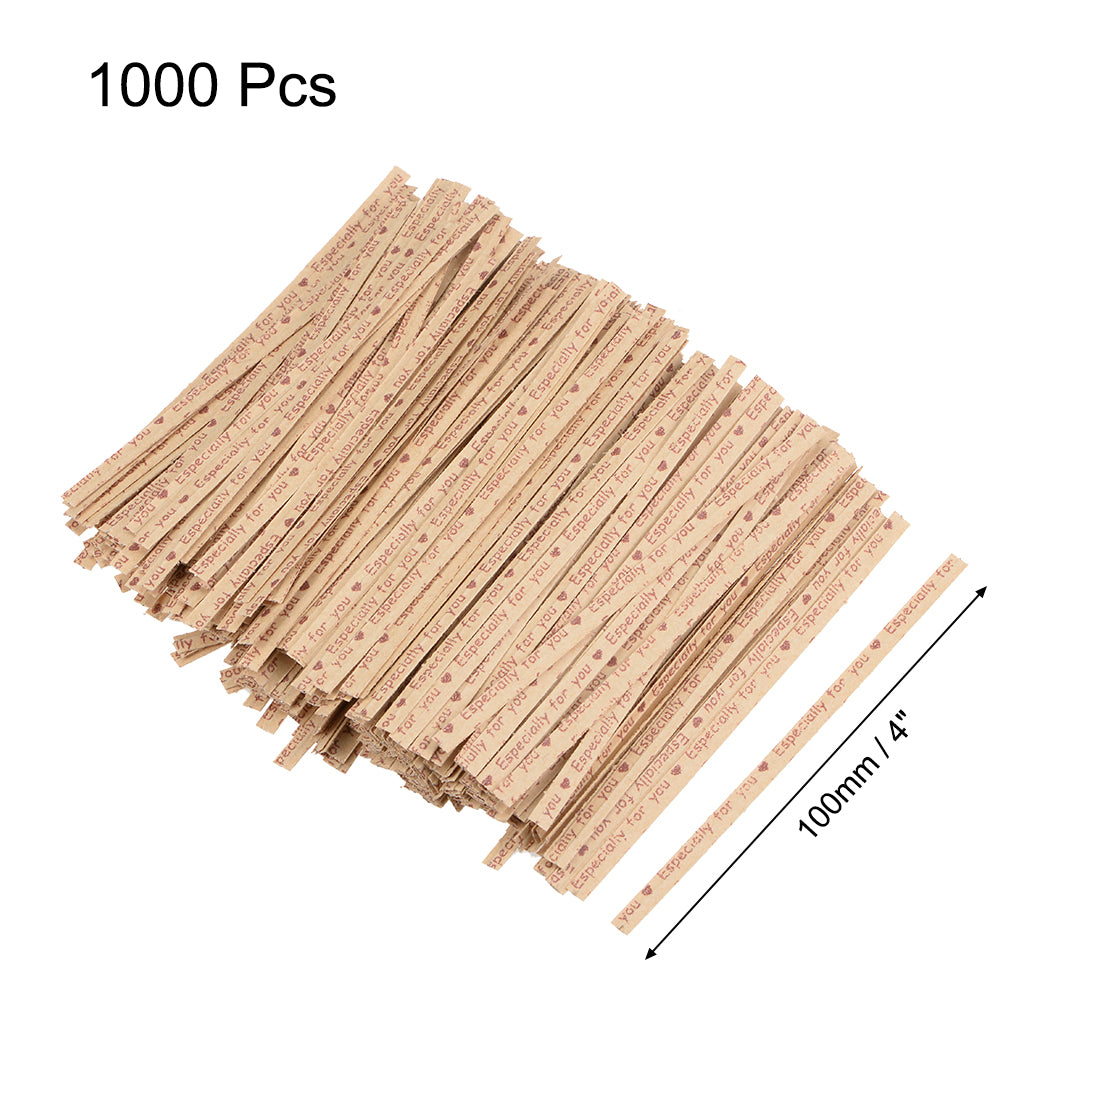 uxcell Uxcell Long Strong Twist Ties 4 Inches Quality  Closure Tie for Tying Gift Bags Art Craft Ties Manage Cords Coffee 1000pcs